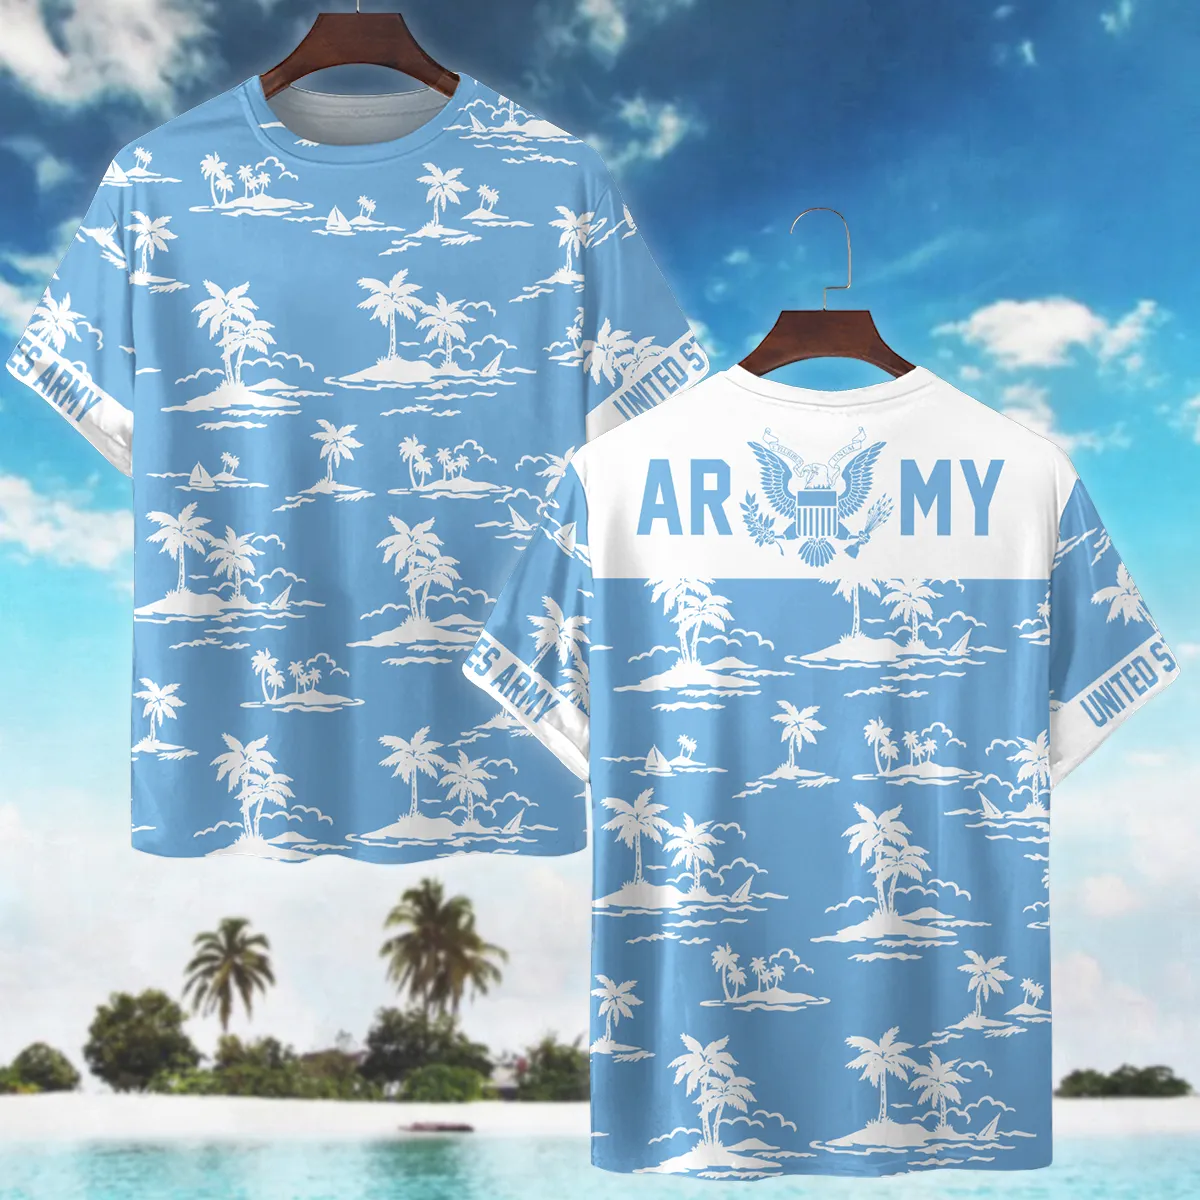 Hawaii Style Pattern U.S. Army Beach Short All Over Prints Gift Loves